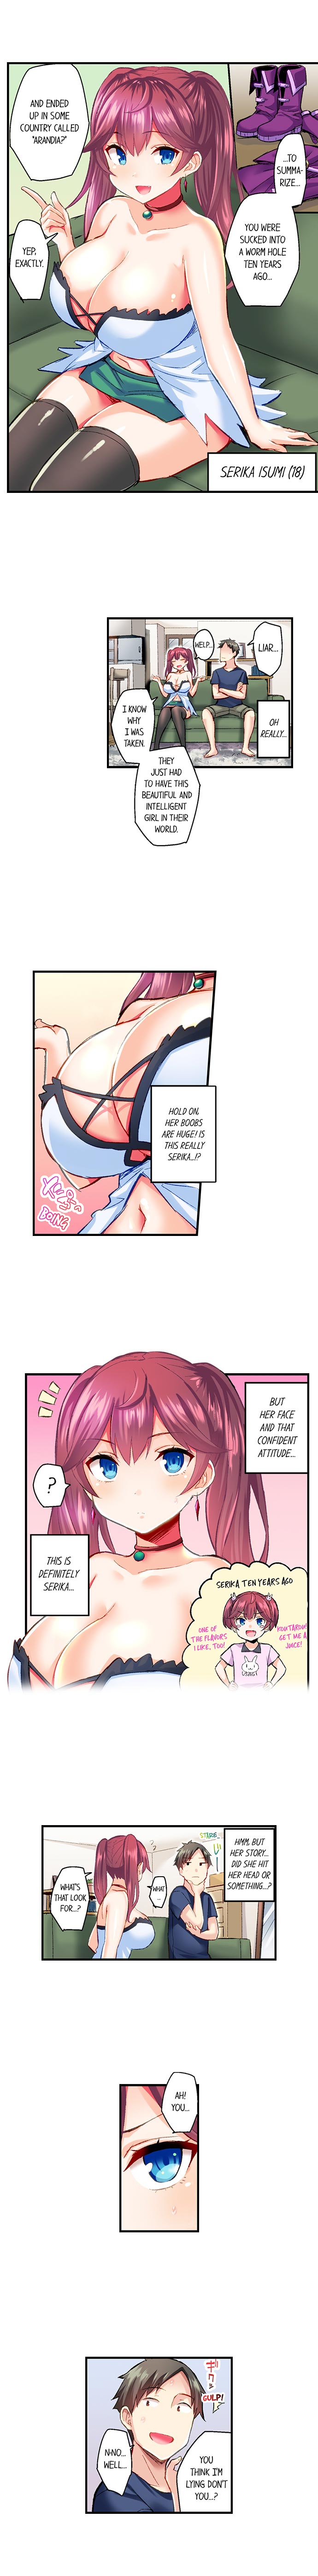 My Friend's Gotta Cum to Use Magic - Chapter 1 Page 5